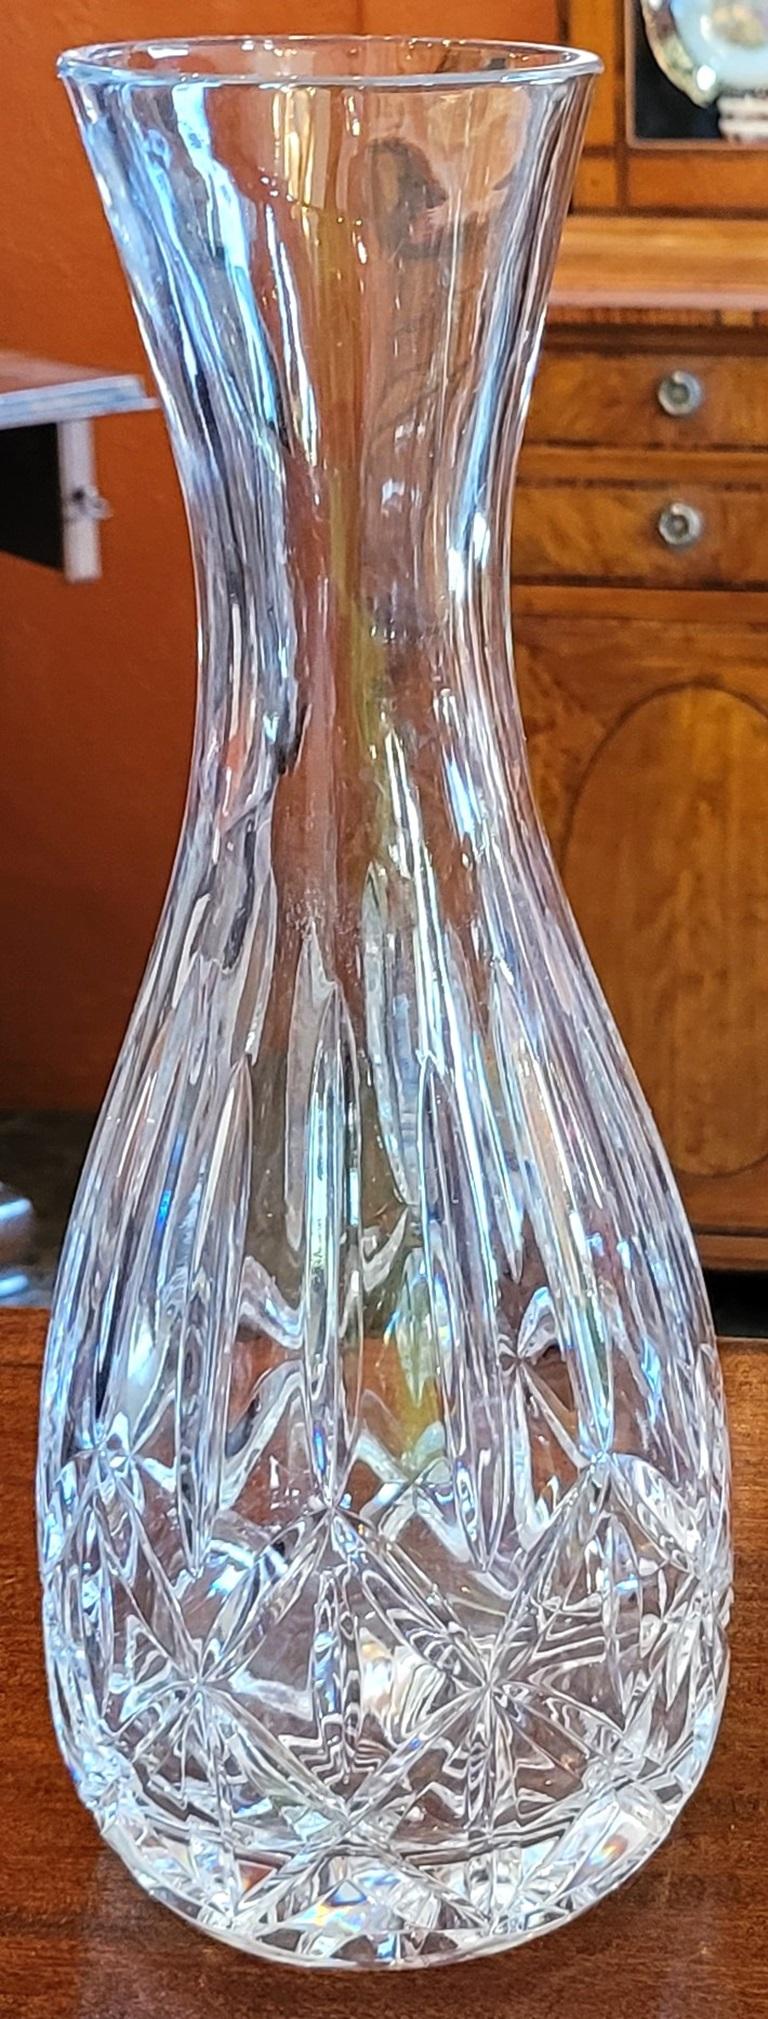 Irish Galway Crystal 11.5 inch Open Decanter In Good Condition For Sale In Dallas, TX